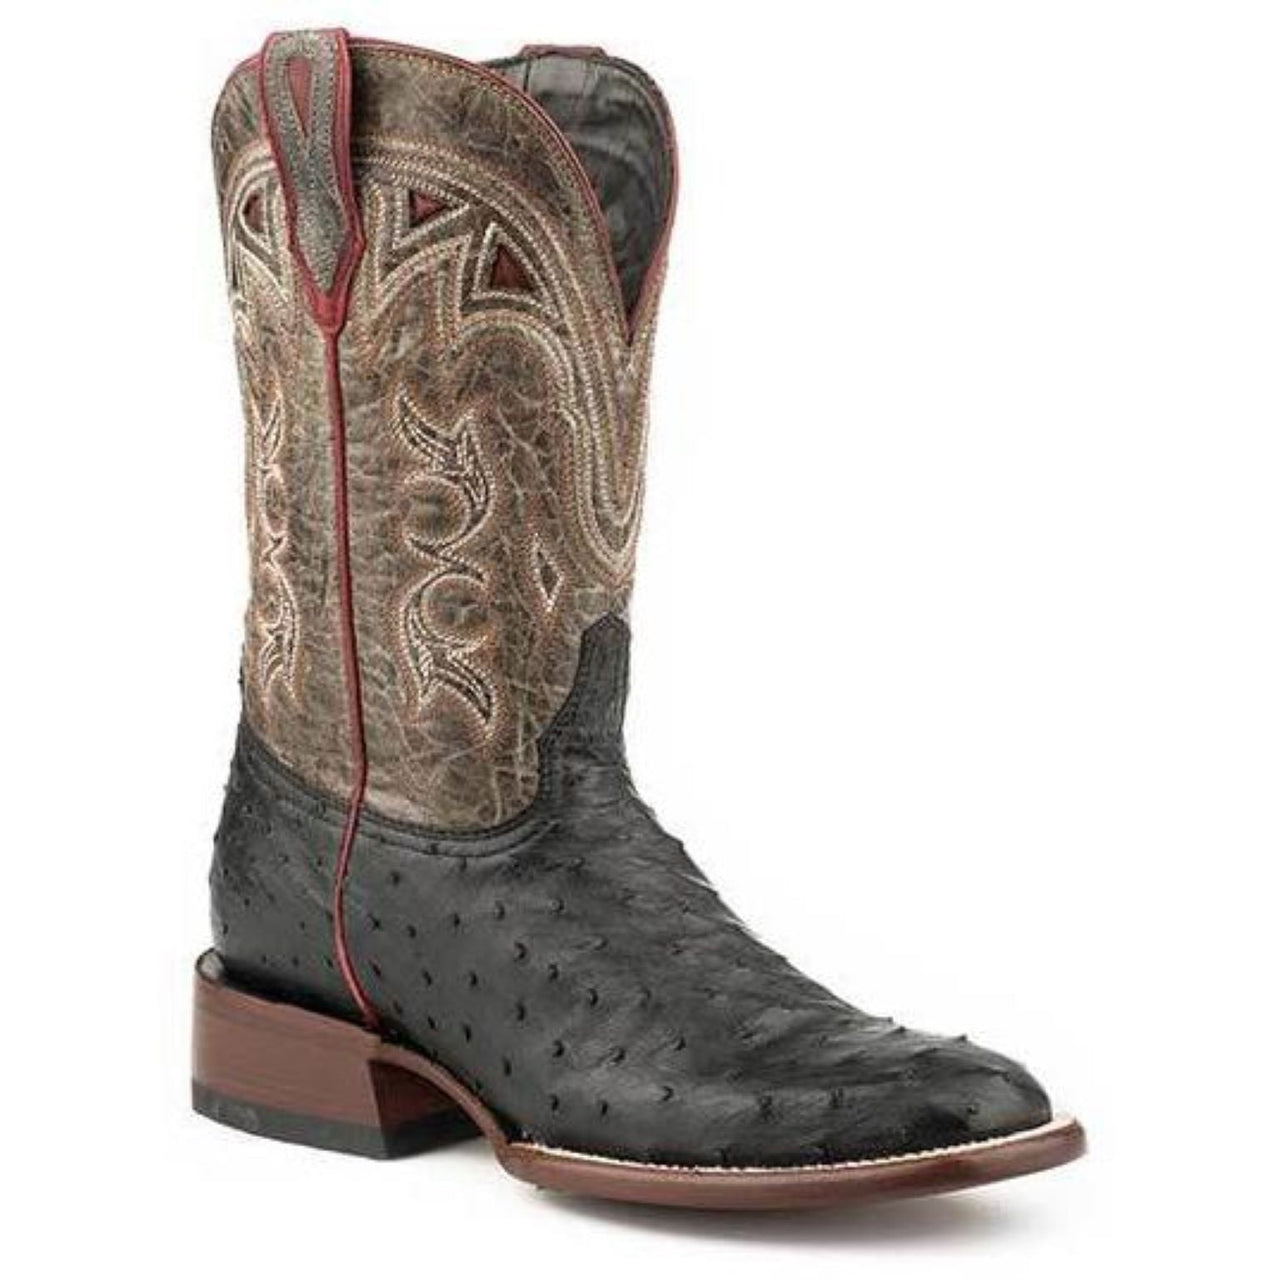 Women's Stetson Dulce Ostrich Exotic Boots Handcrafted JBS Collection Black - yeehawcowboy